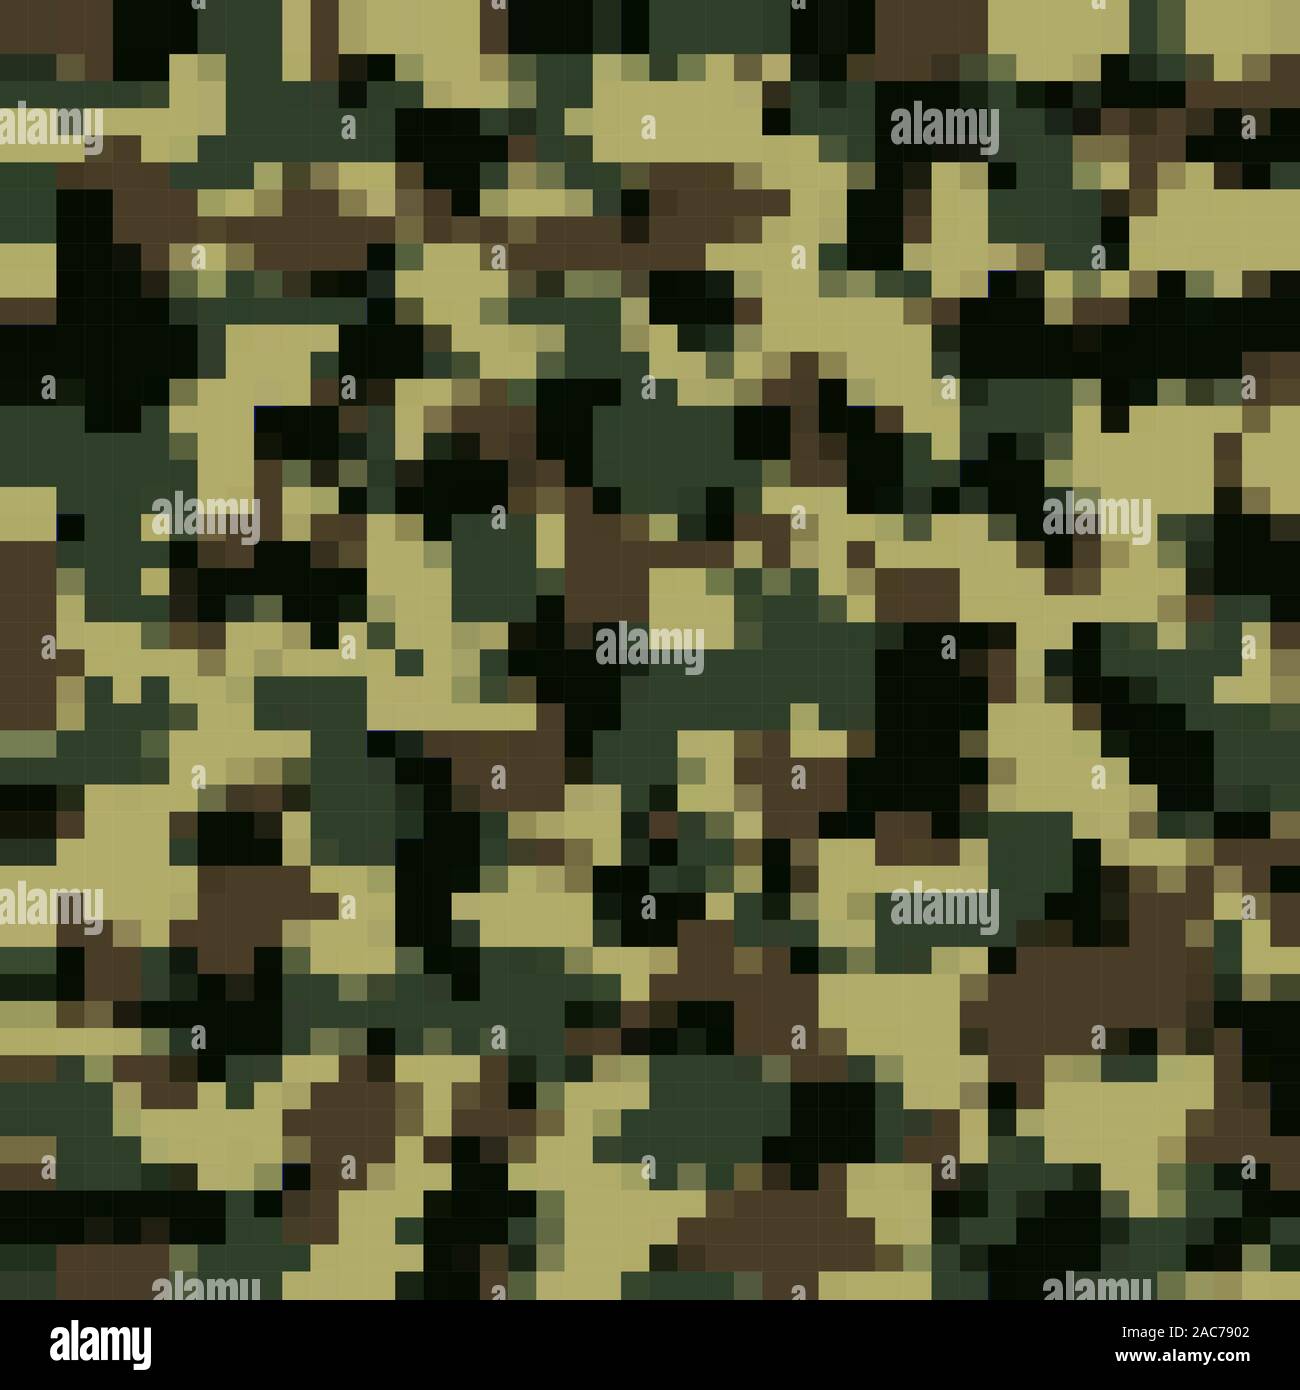 Urban Camouflage Background. Army Military Pattern. Green Pixel Fabric Textile Print for Uniforms and Weapons Stock Vector